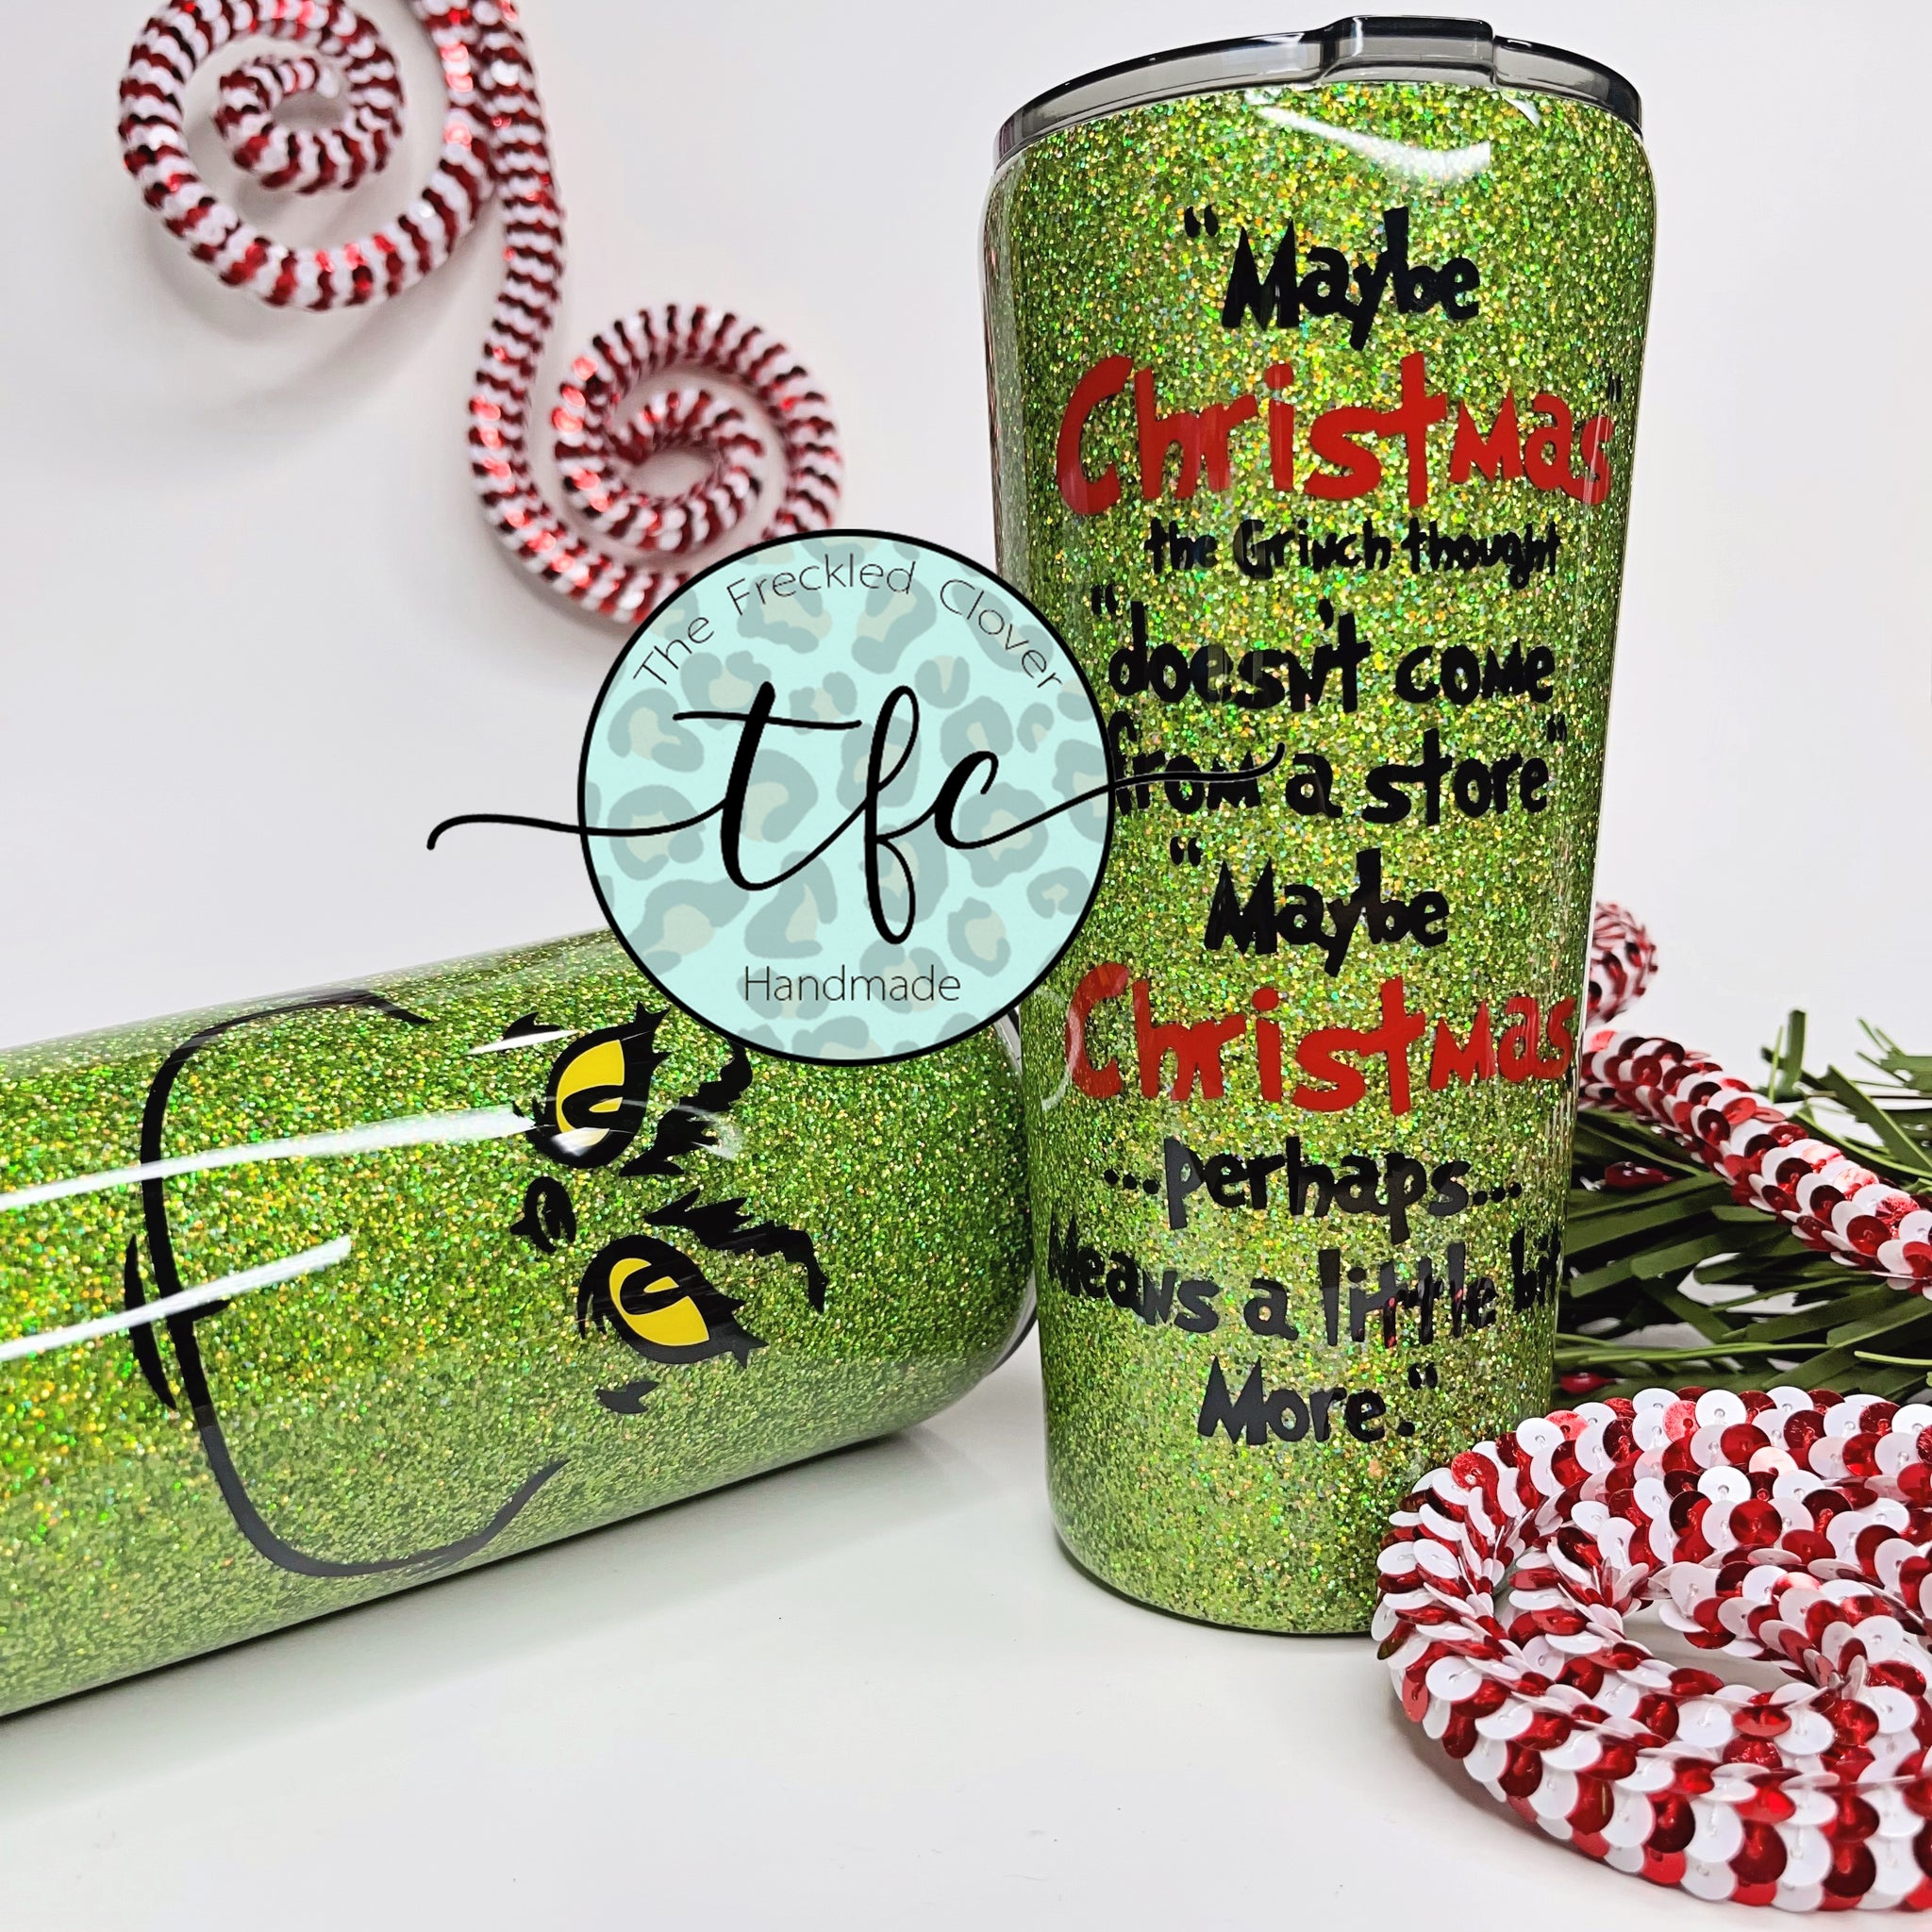 Grinch Glitter Tumbler Maybe Christmas He Thought Doesn't Come